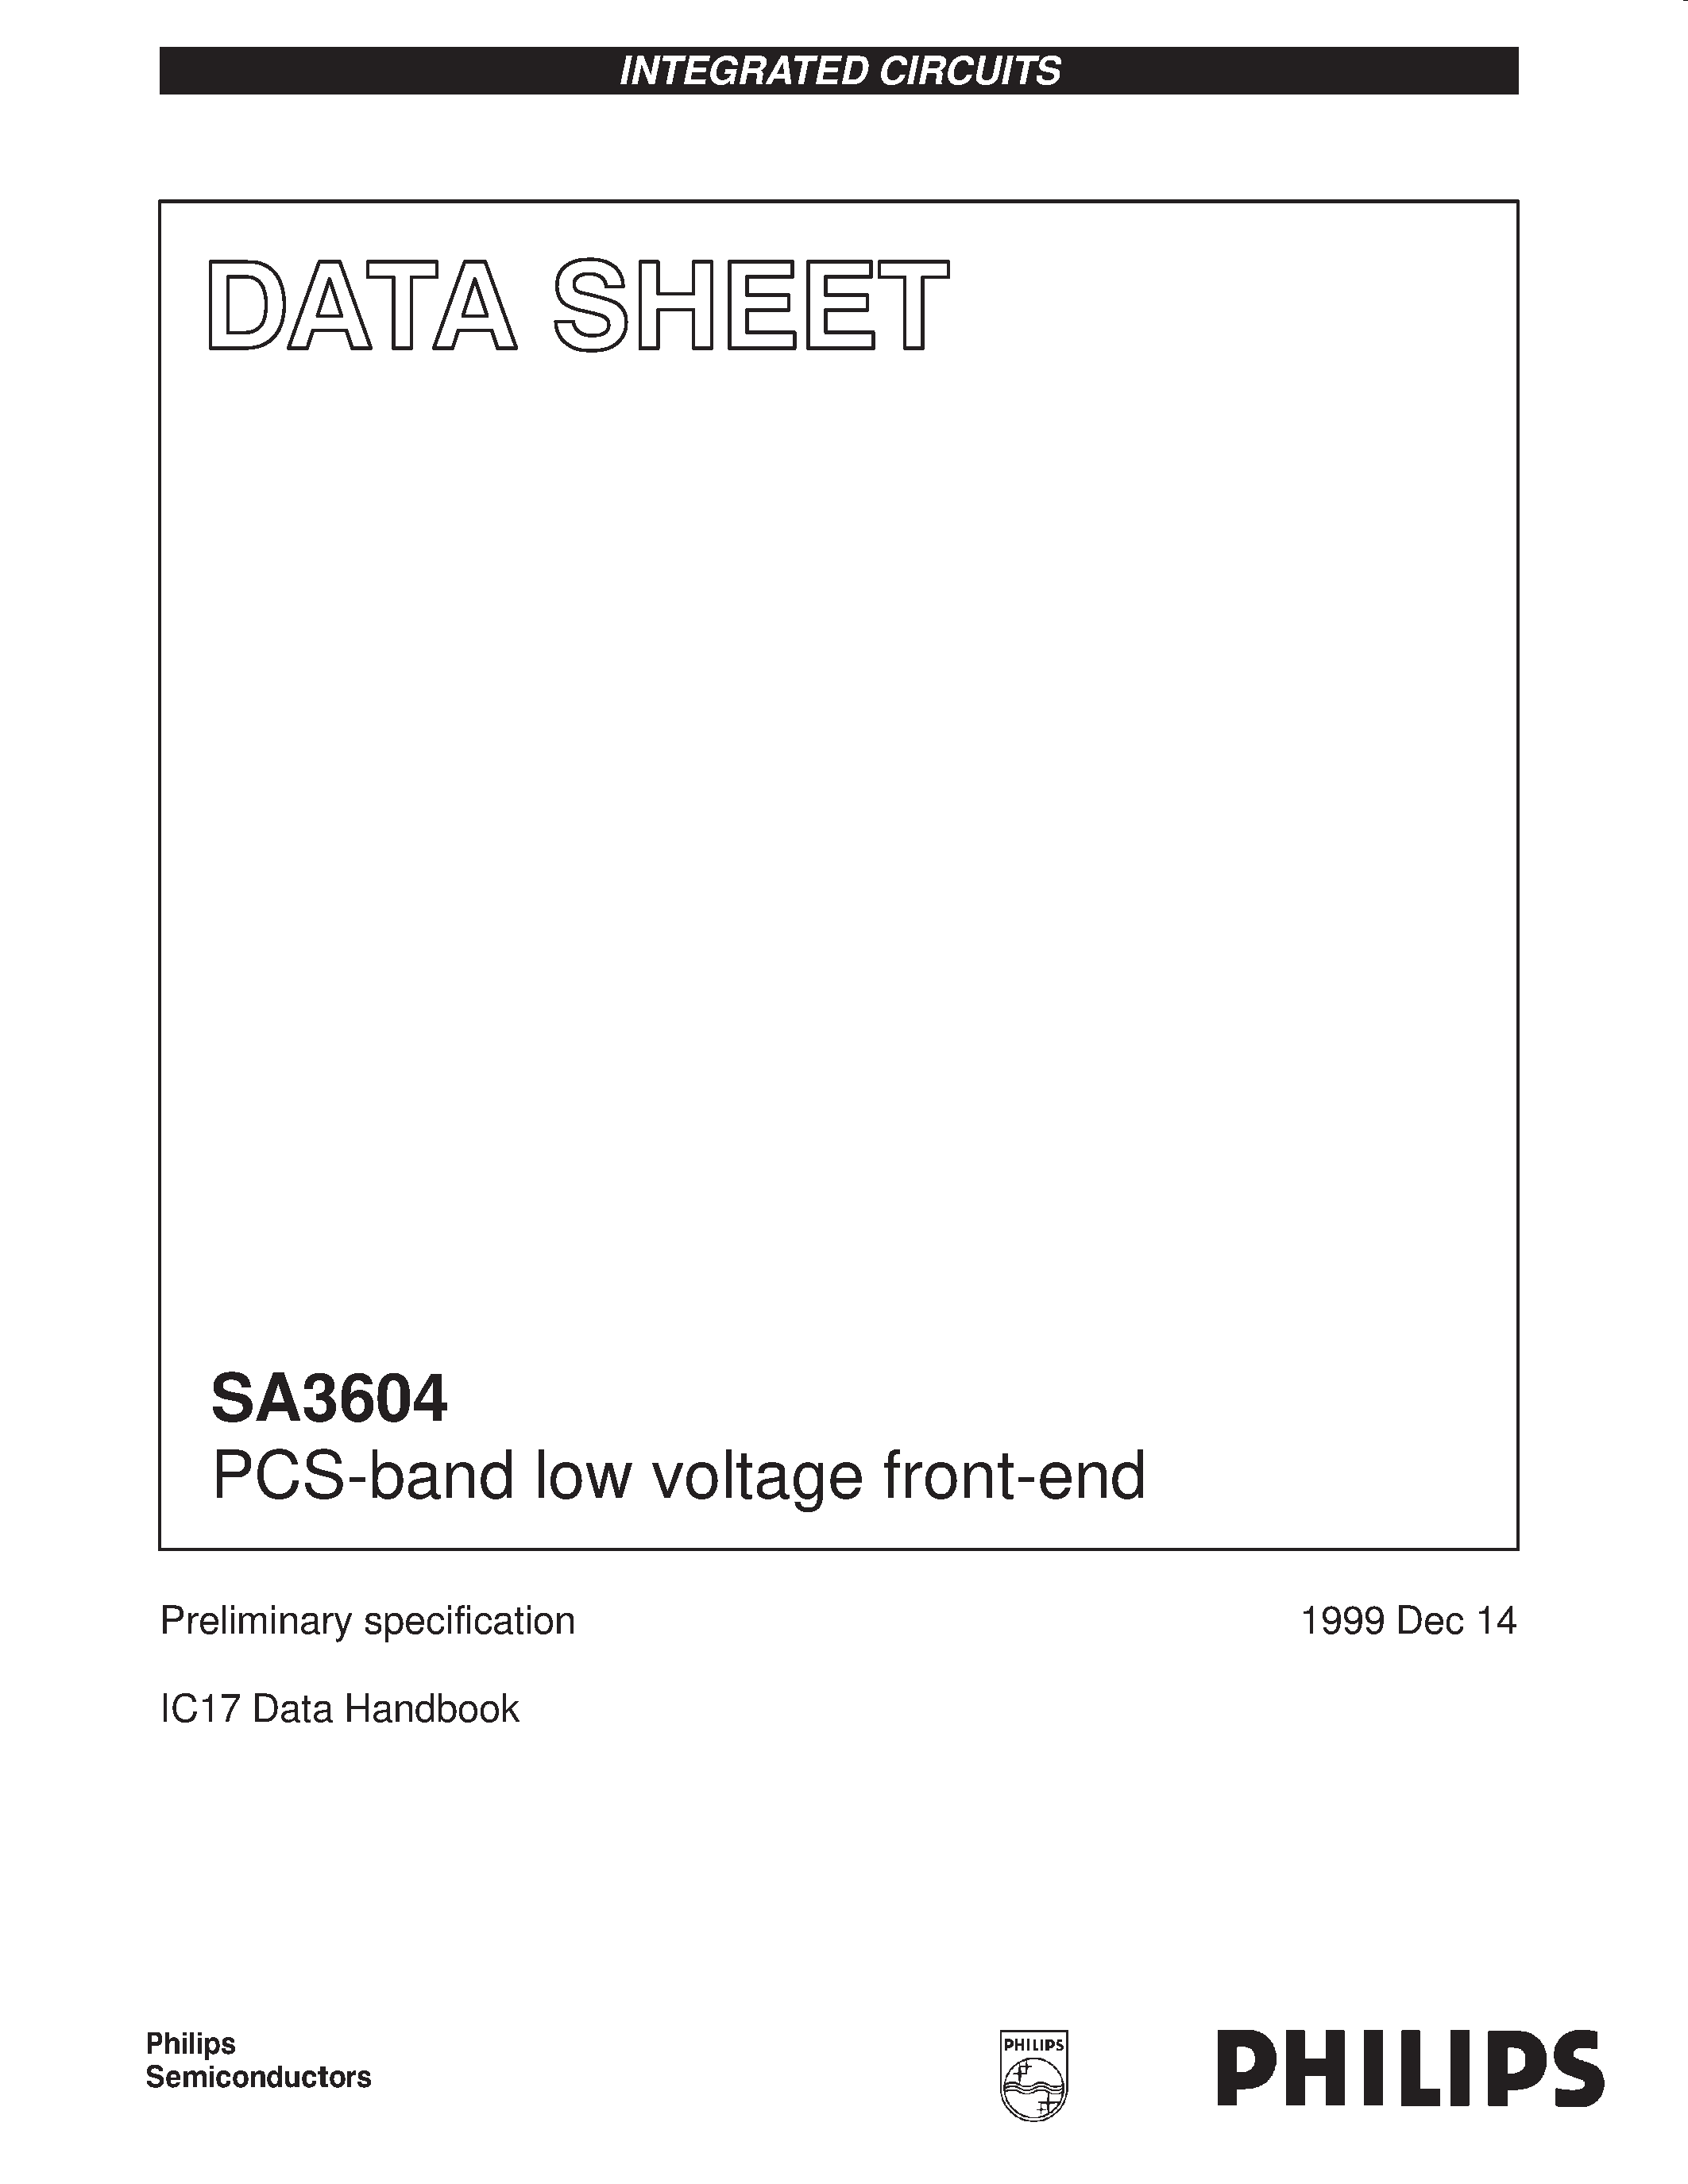 Datasheet SA3604DH - PCS-band low voltage front-end page 1